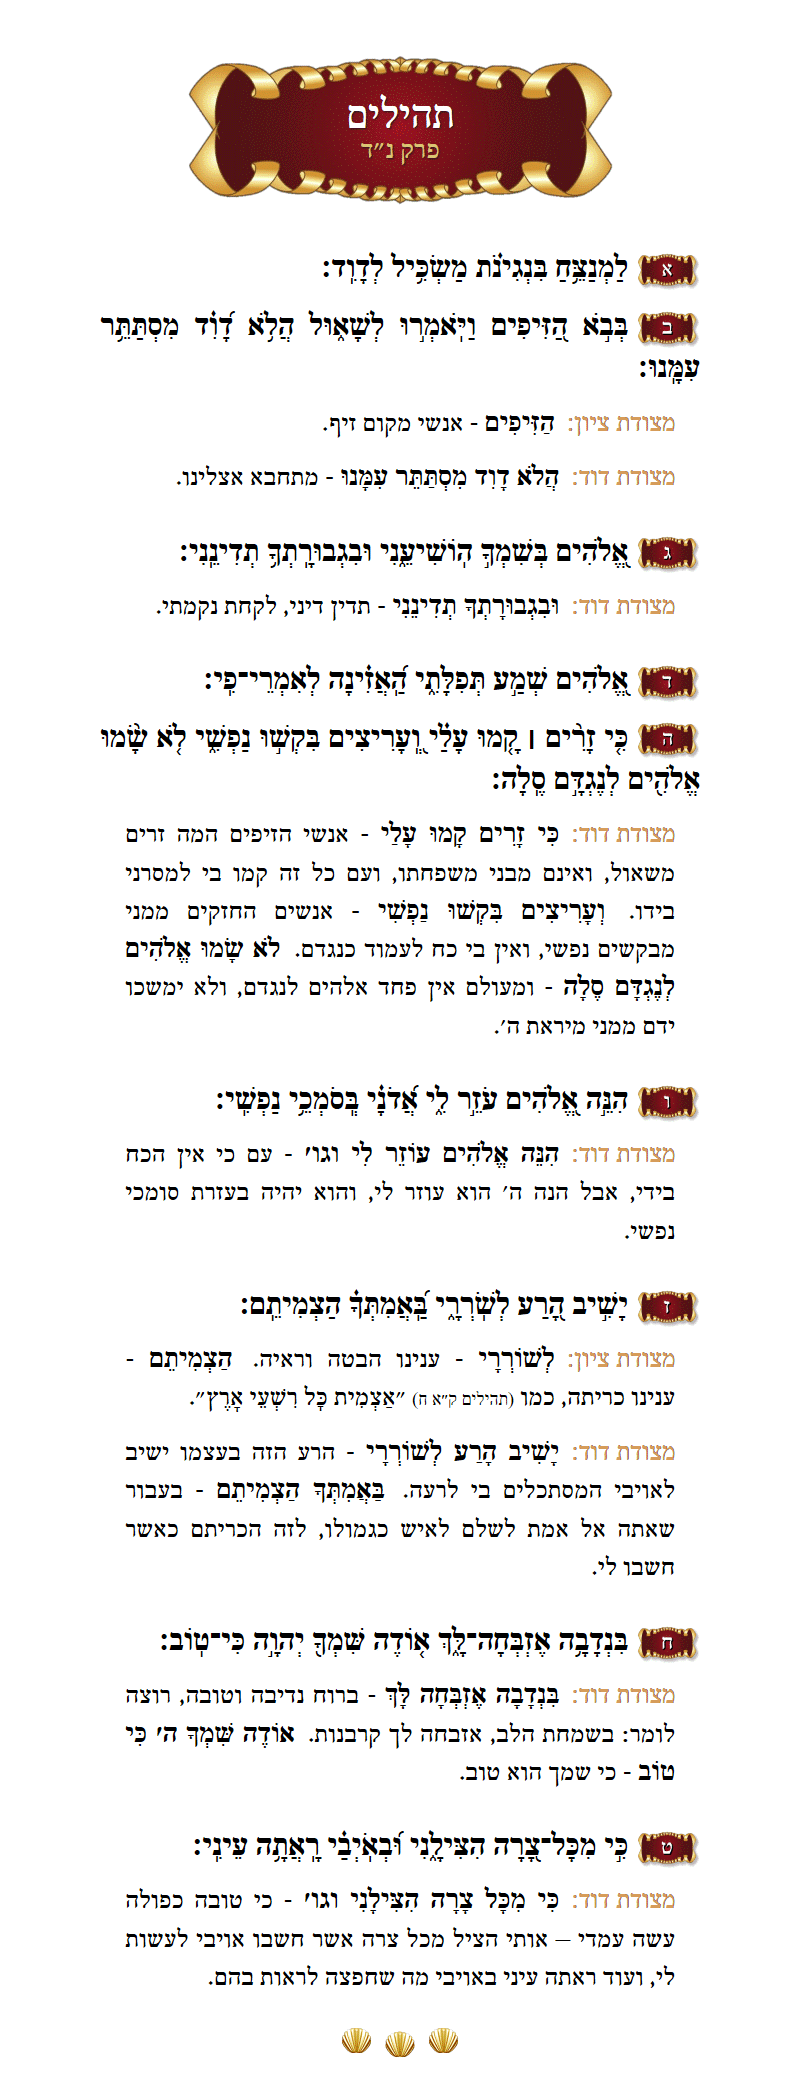 Sefer Tehillim Chapter 54 with commentary